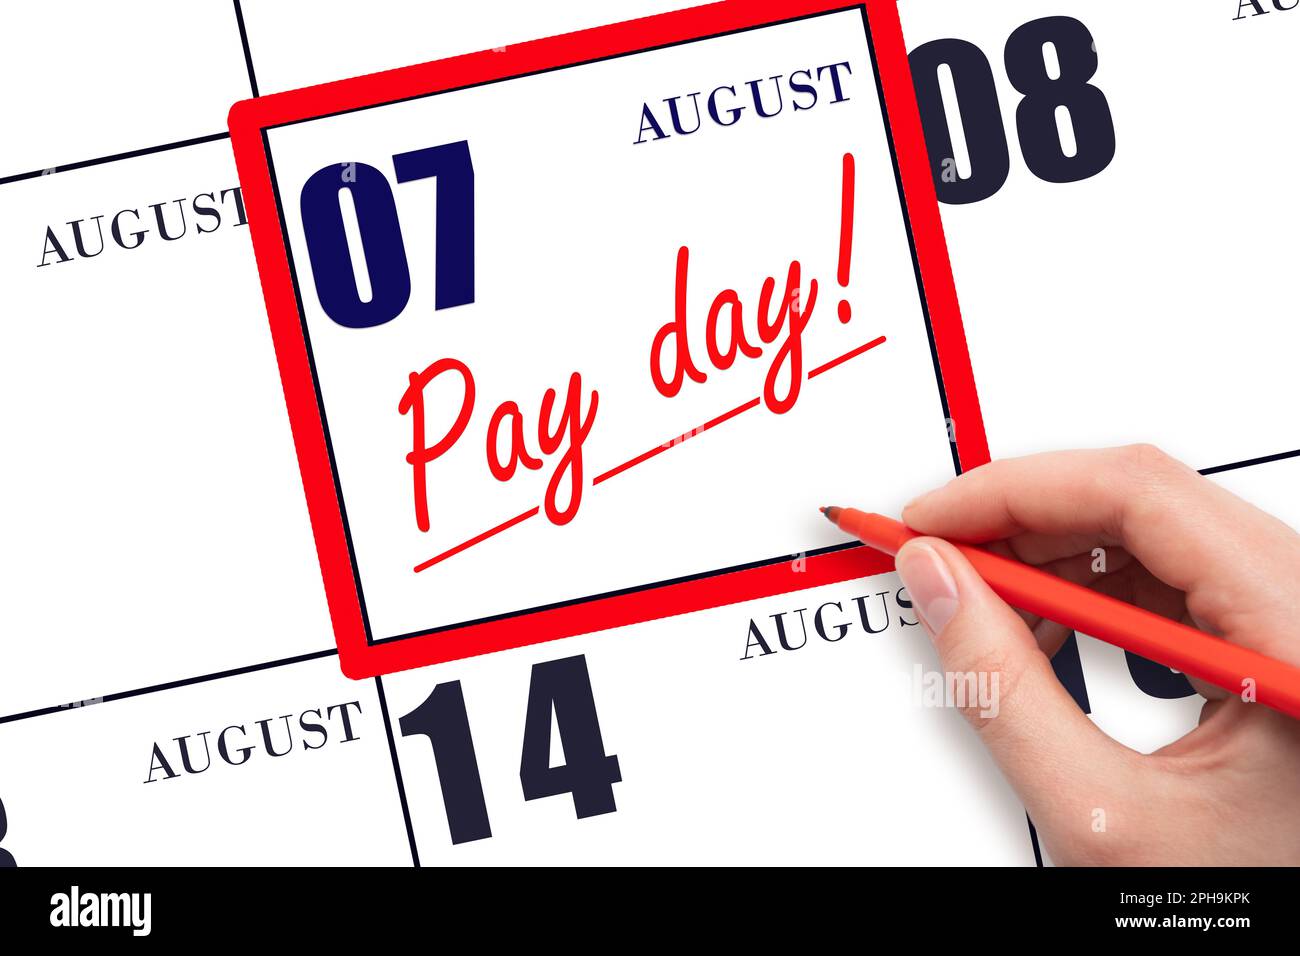 7th day of August. Hand writing text PAY DATE on calendar date August 7 and underline it. Payment due date. Reminder concept of payment. Summer month, Stock Photo